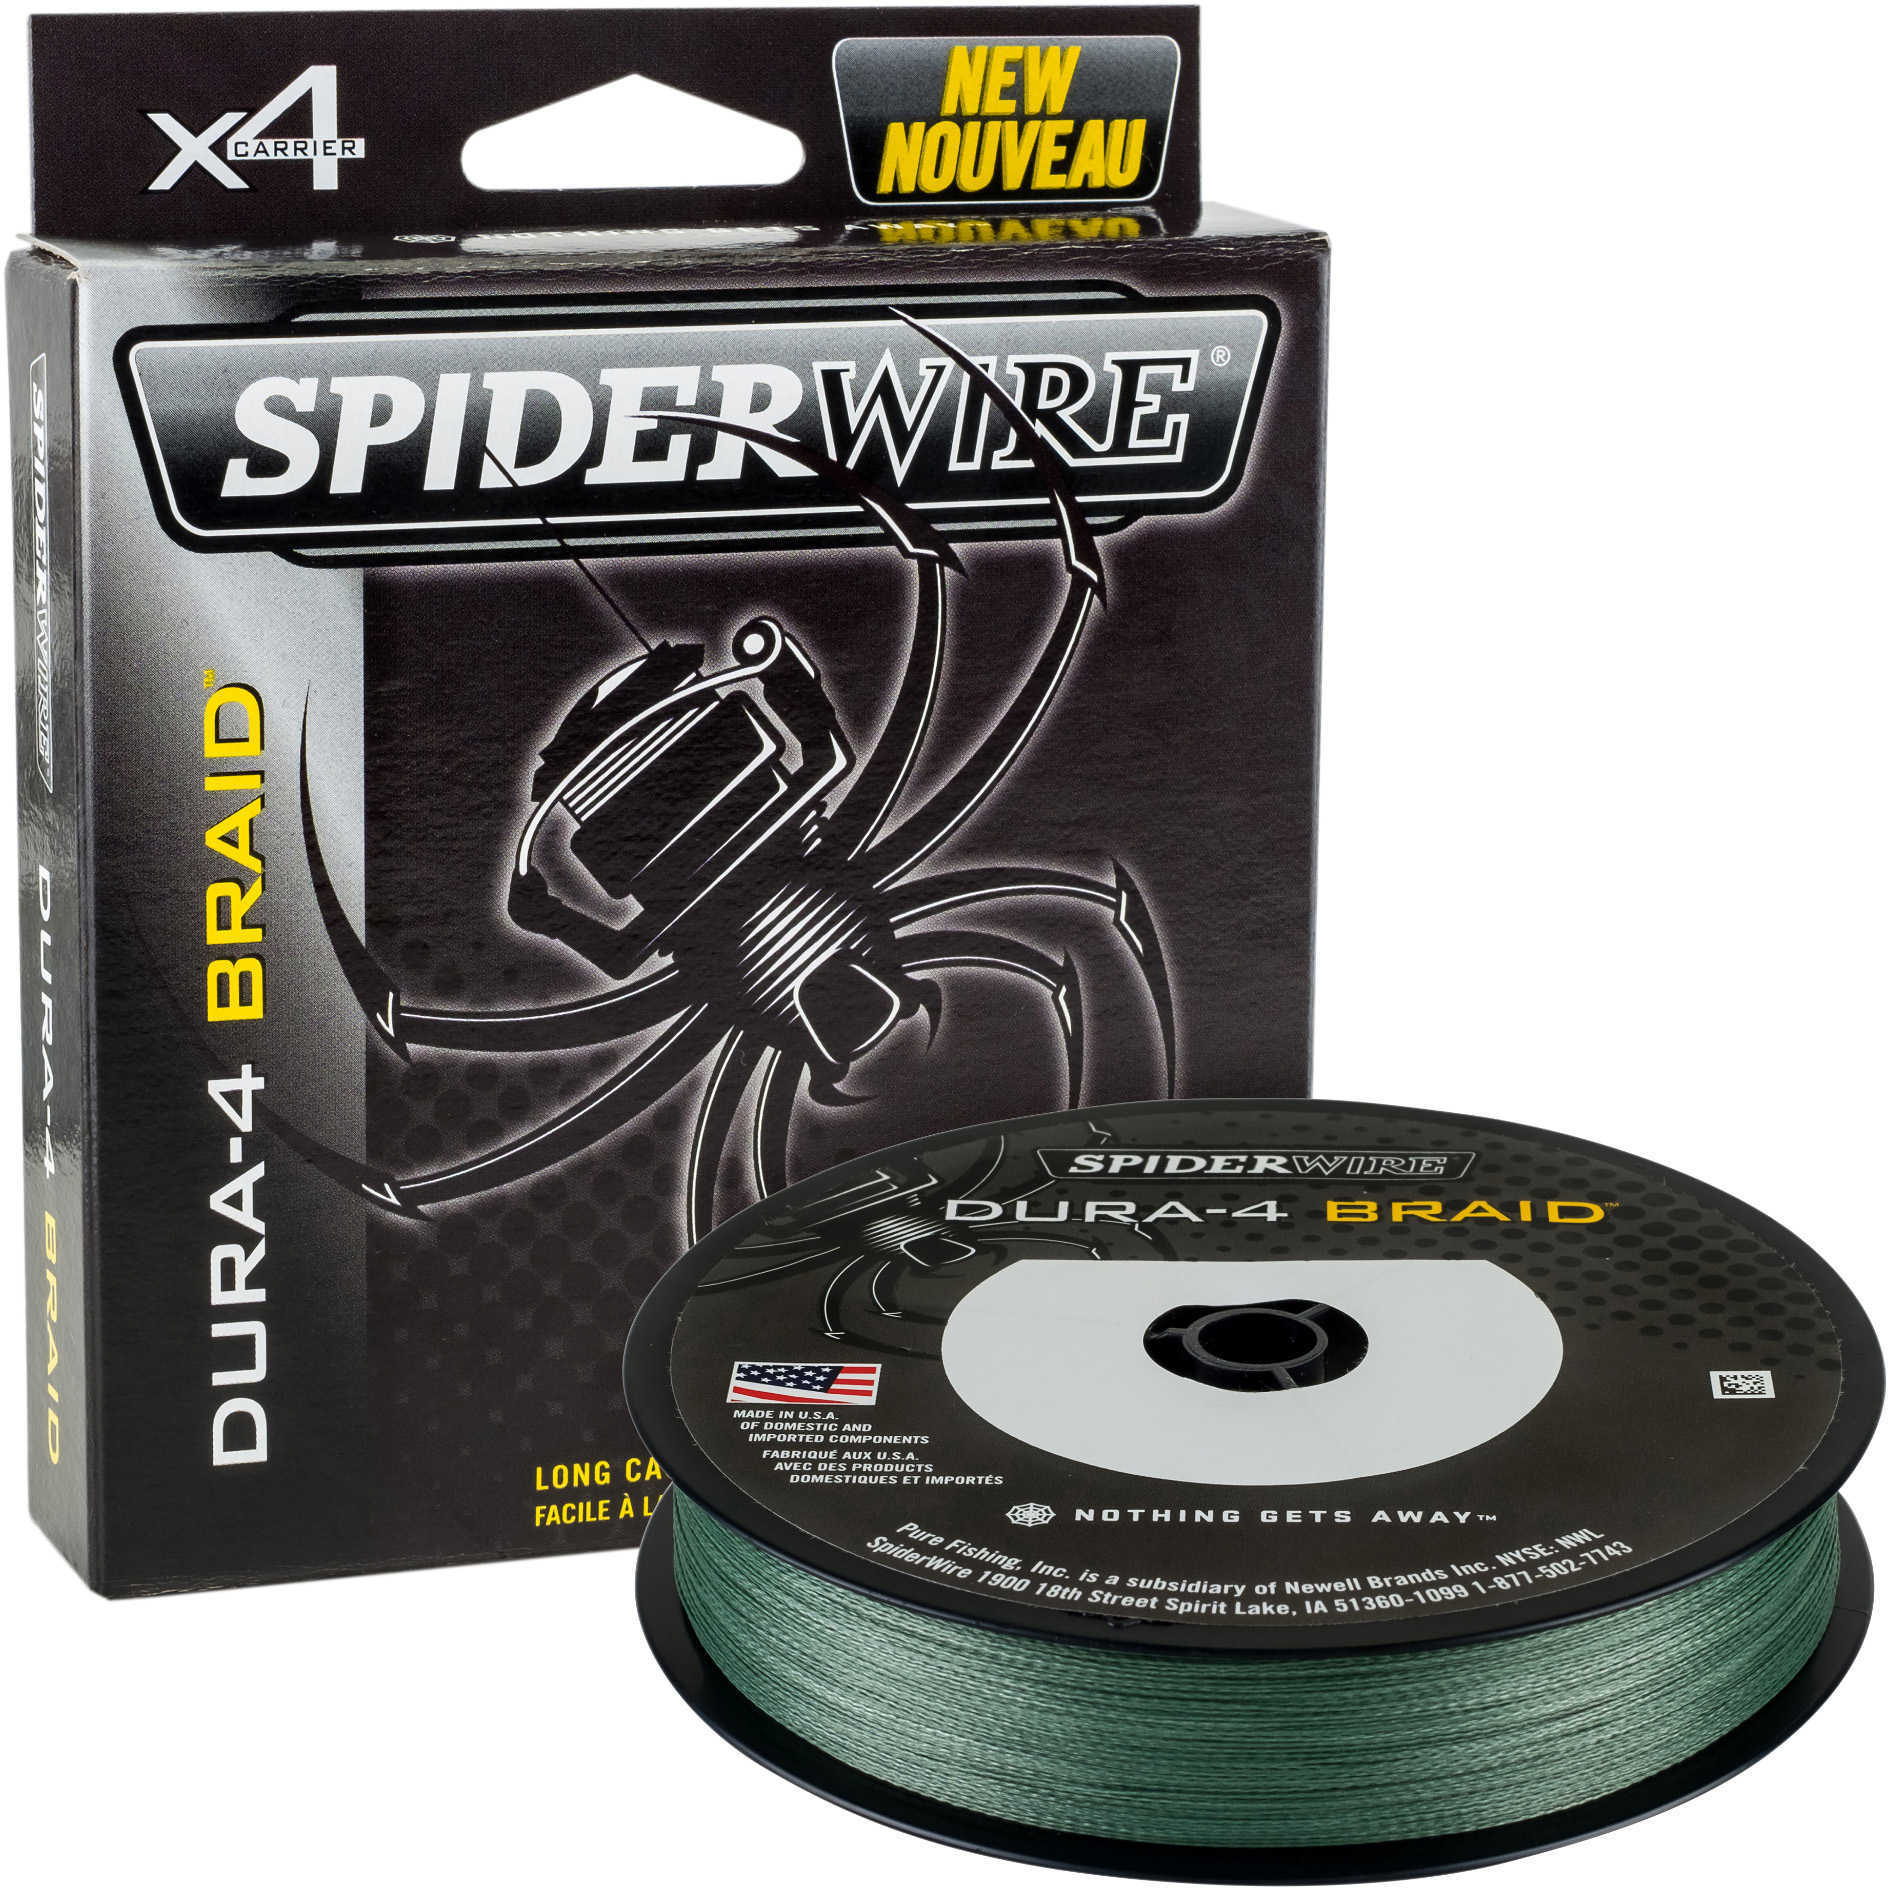 Spiderwire Dura-4 Braided Line 200 Yards , 50 lbs Tested, 0.014" Diameter, Moss Green